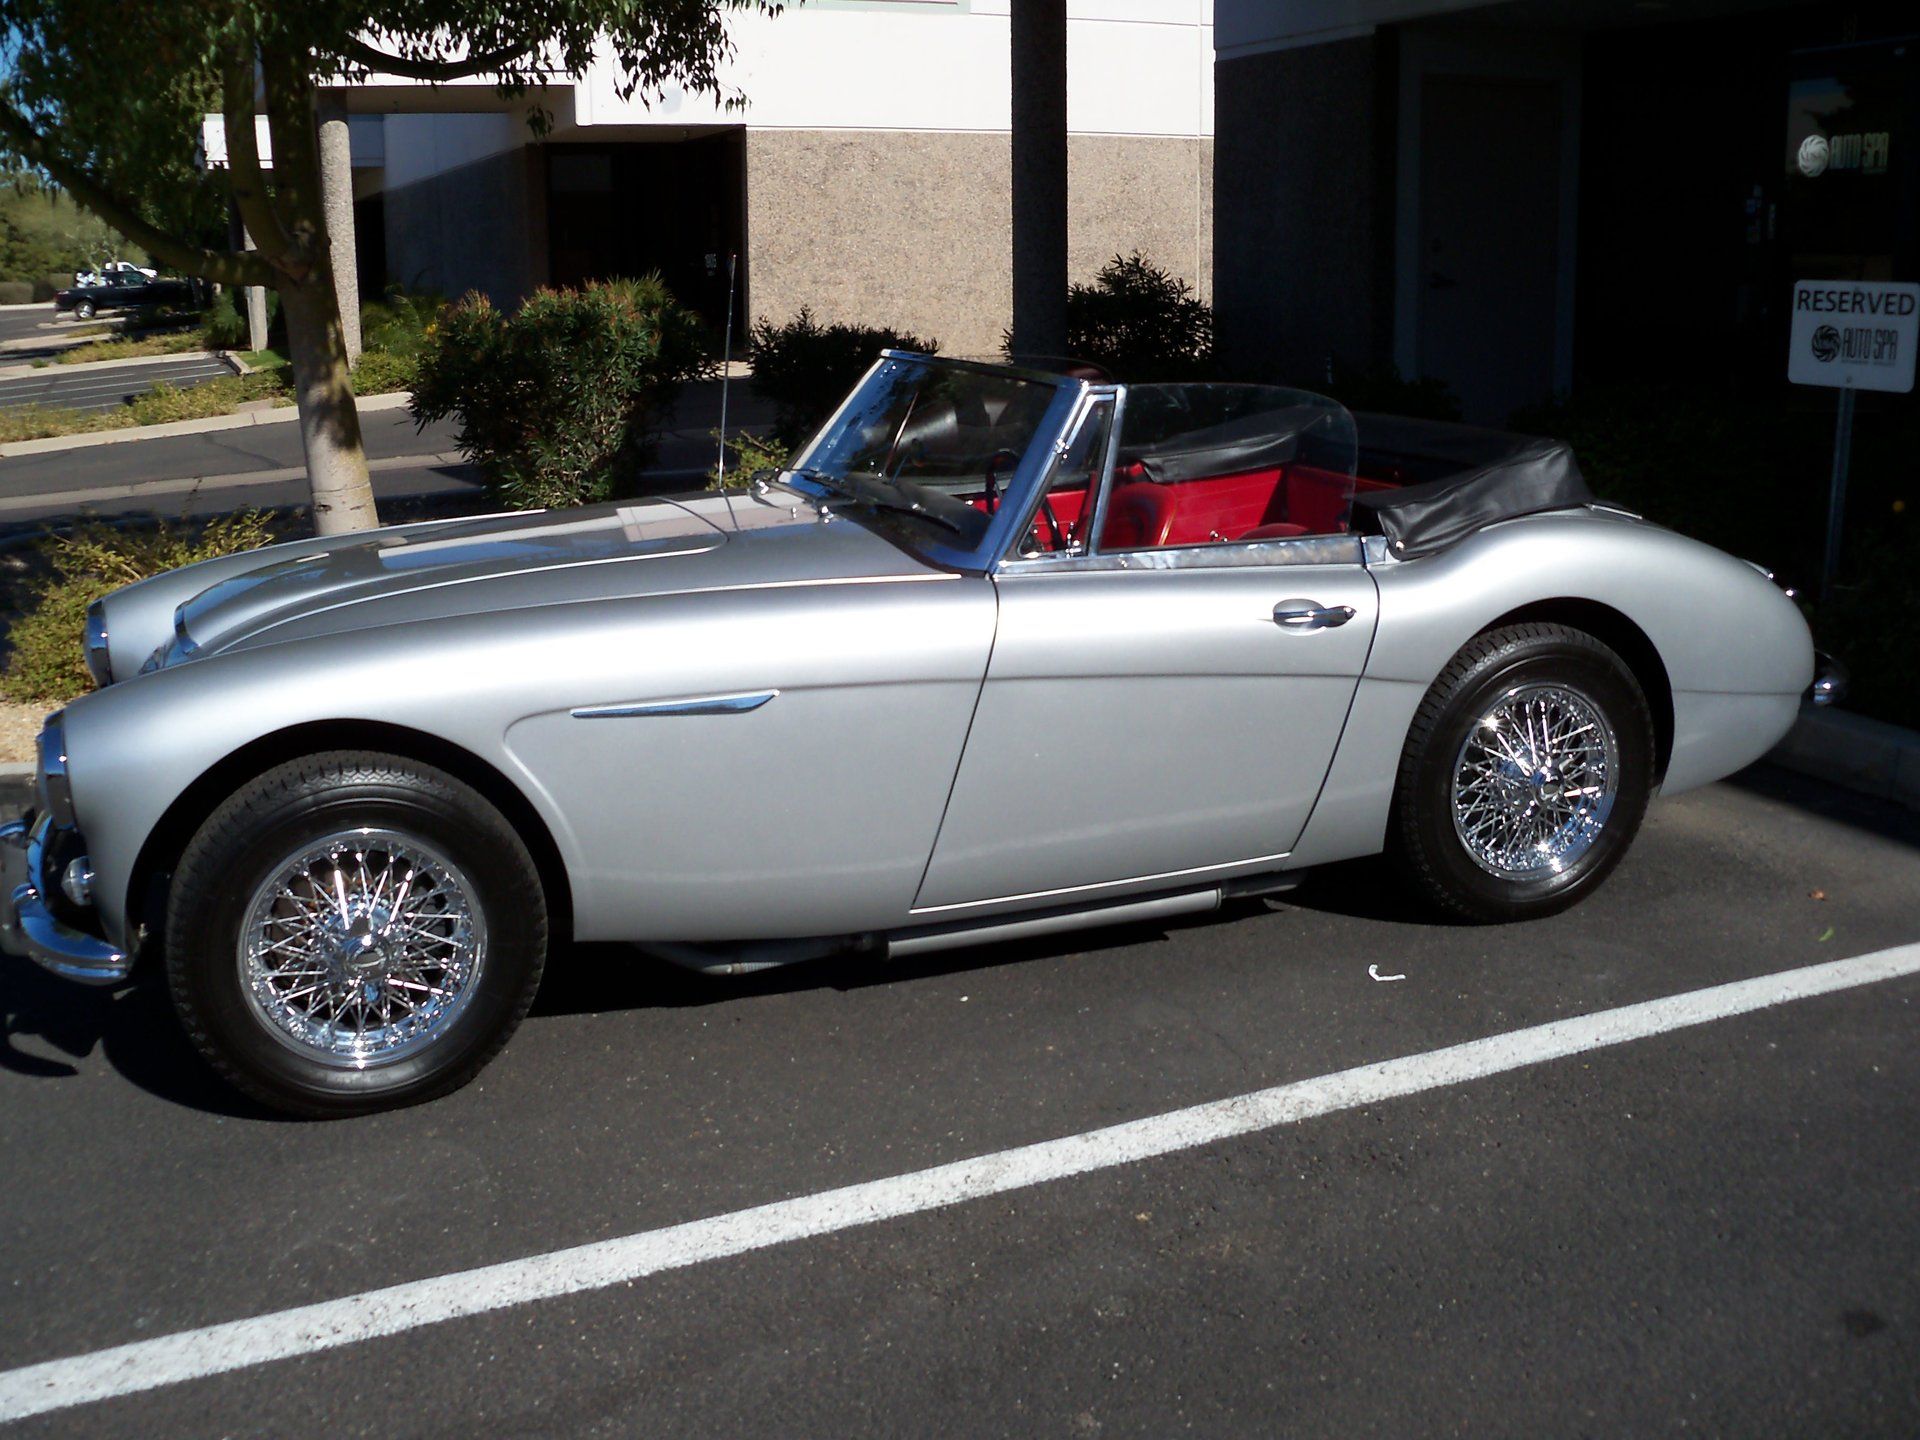 Silver car with convertible top